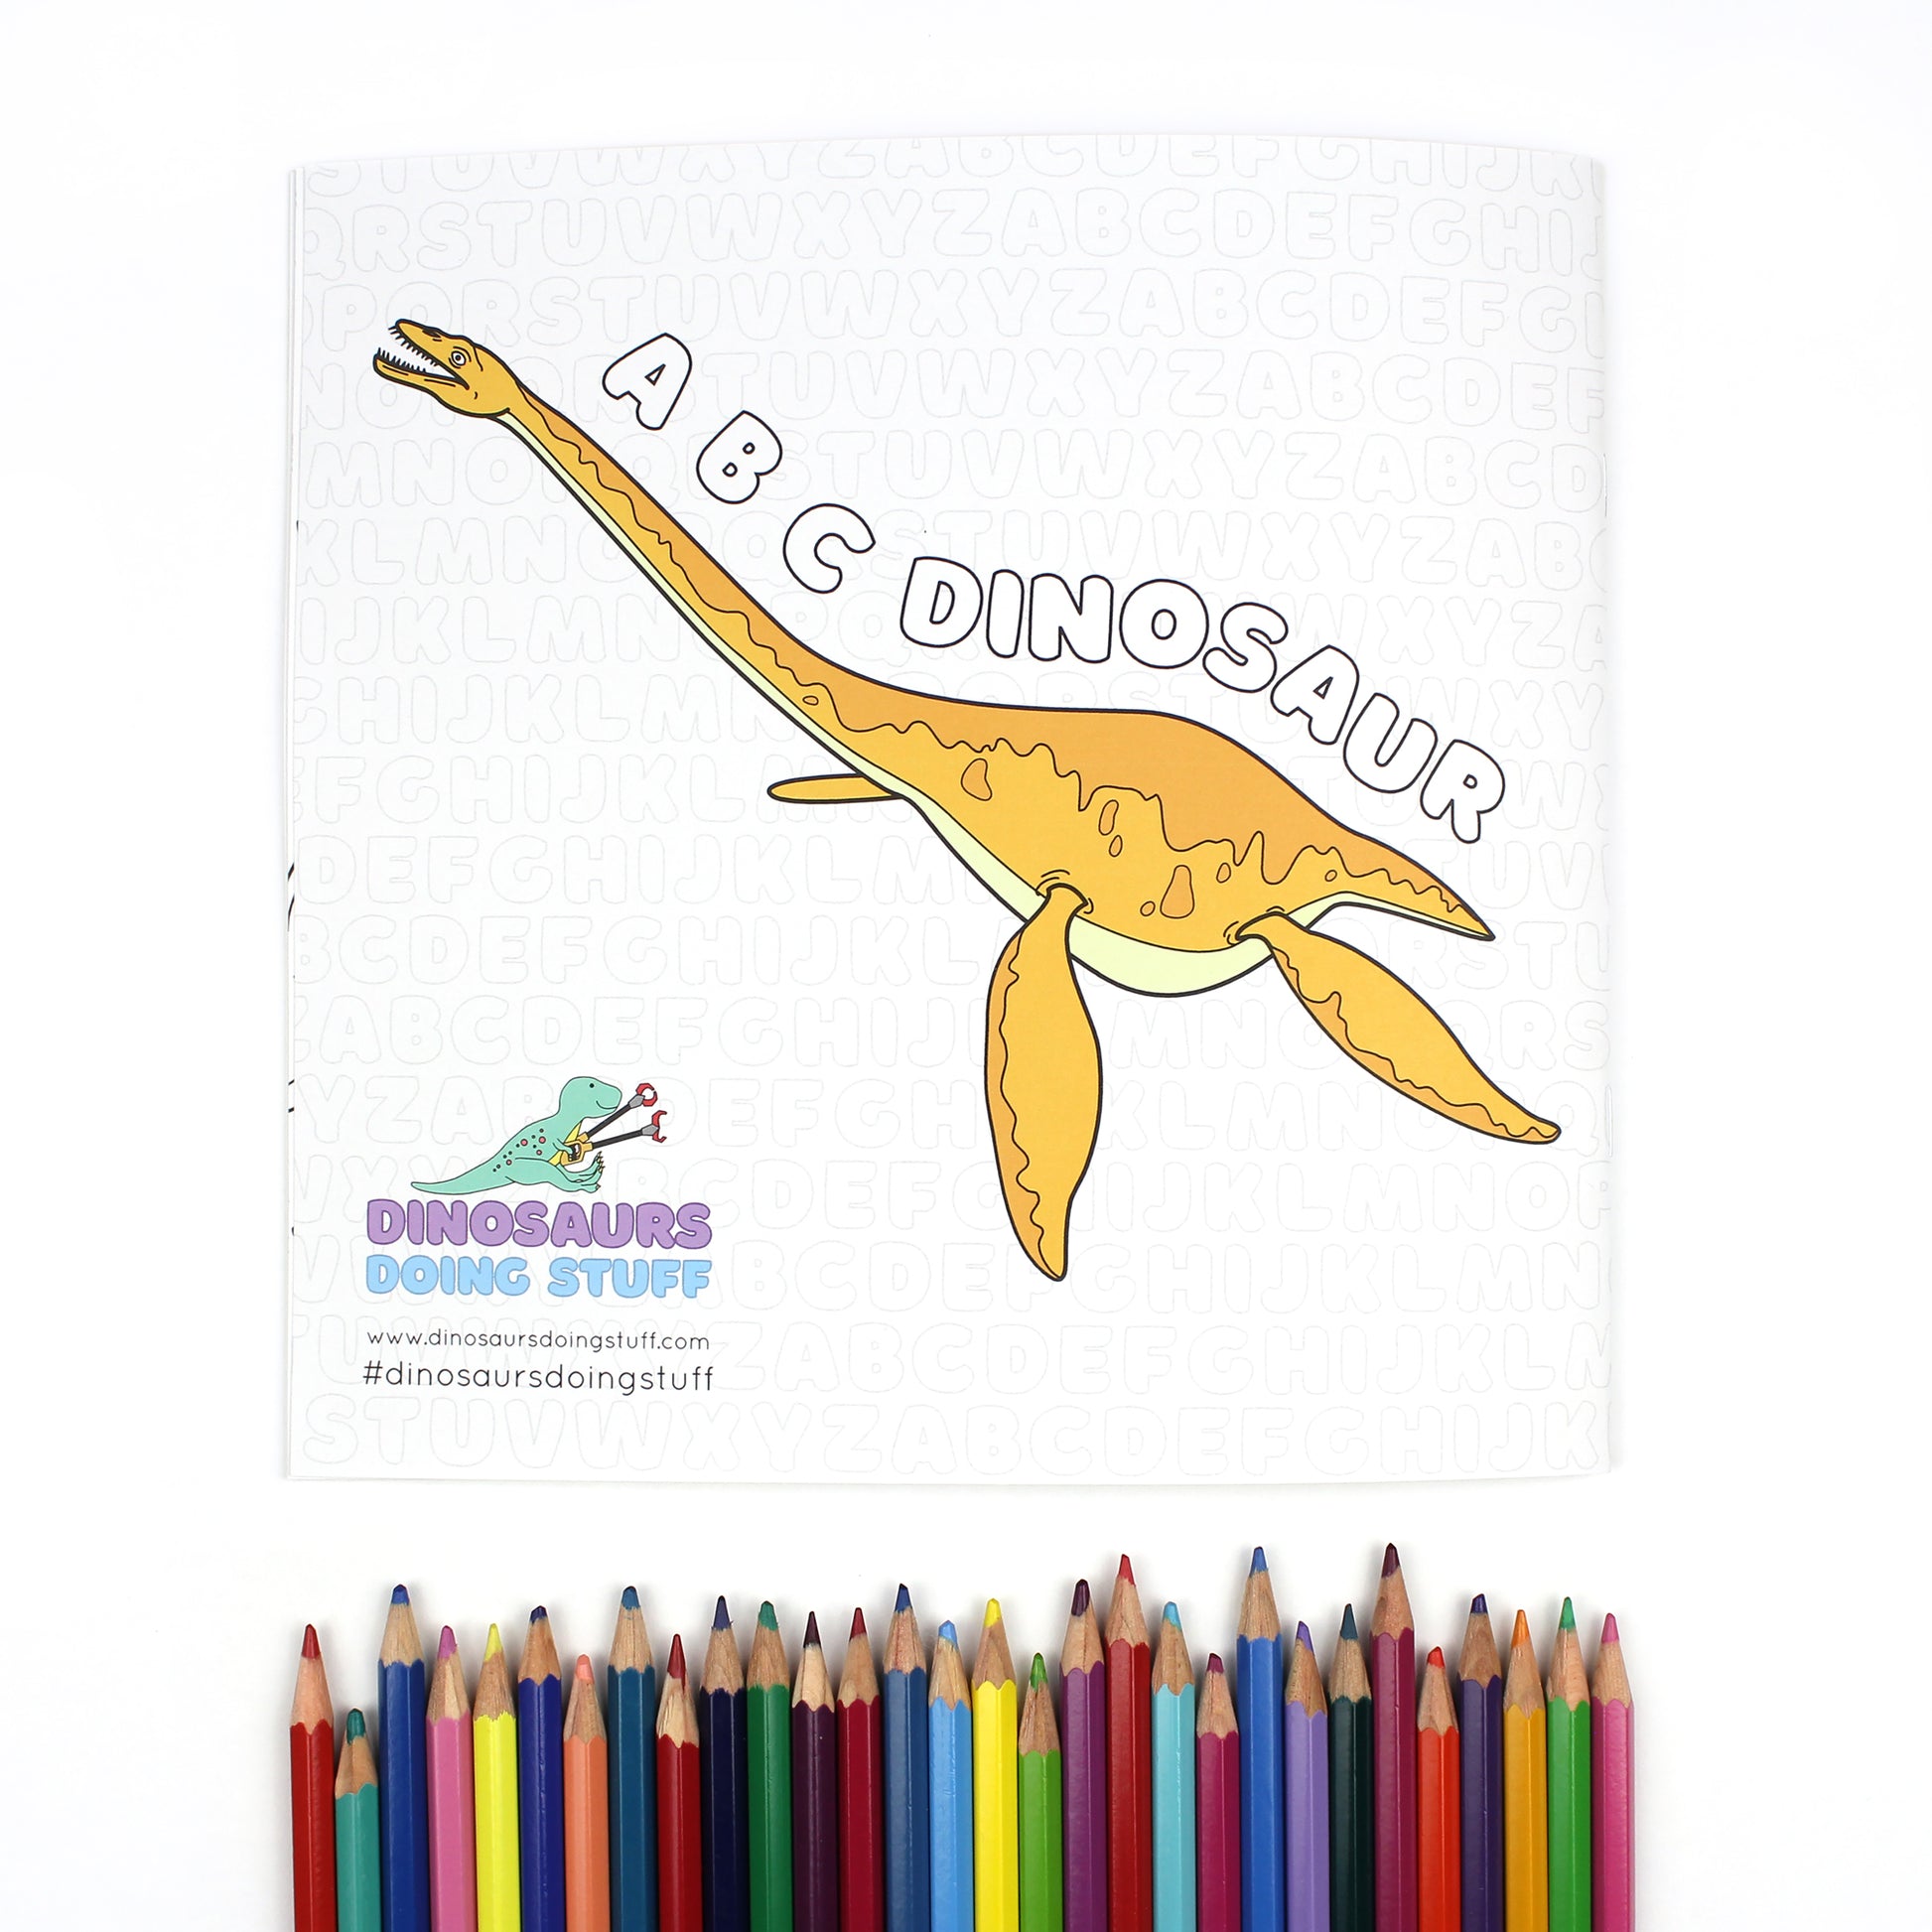 The back cover of ABC Dinosaur Colouring Book. There is also a row of brightly coloured pencils below.